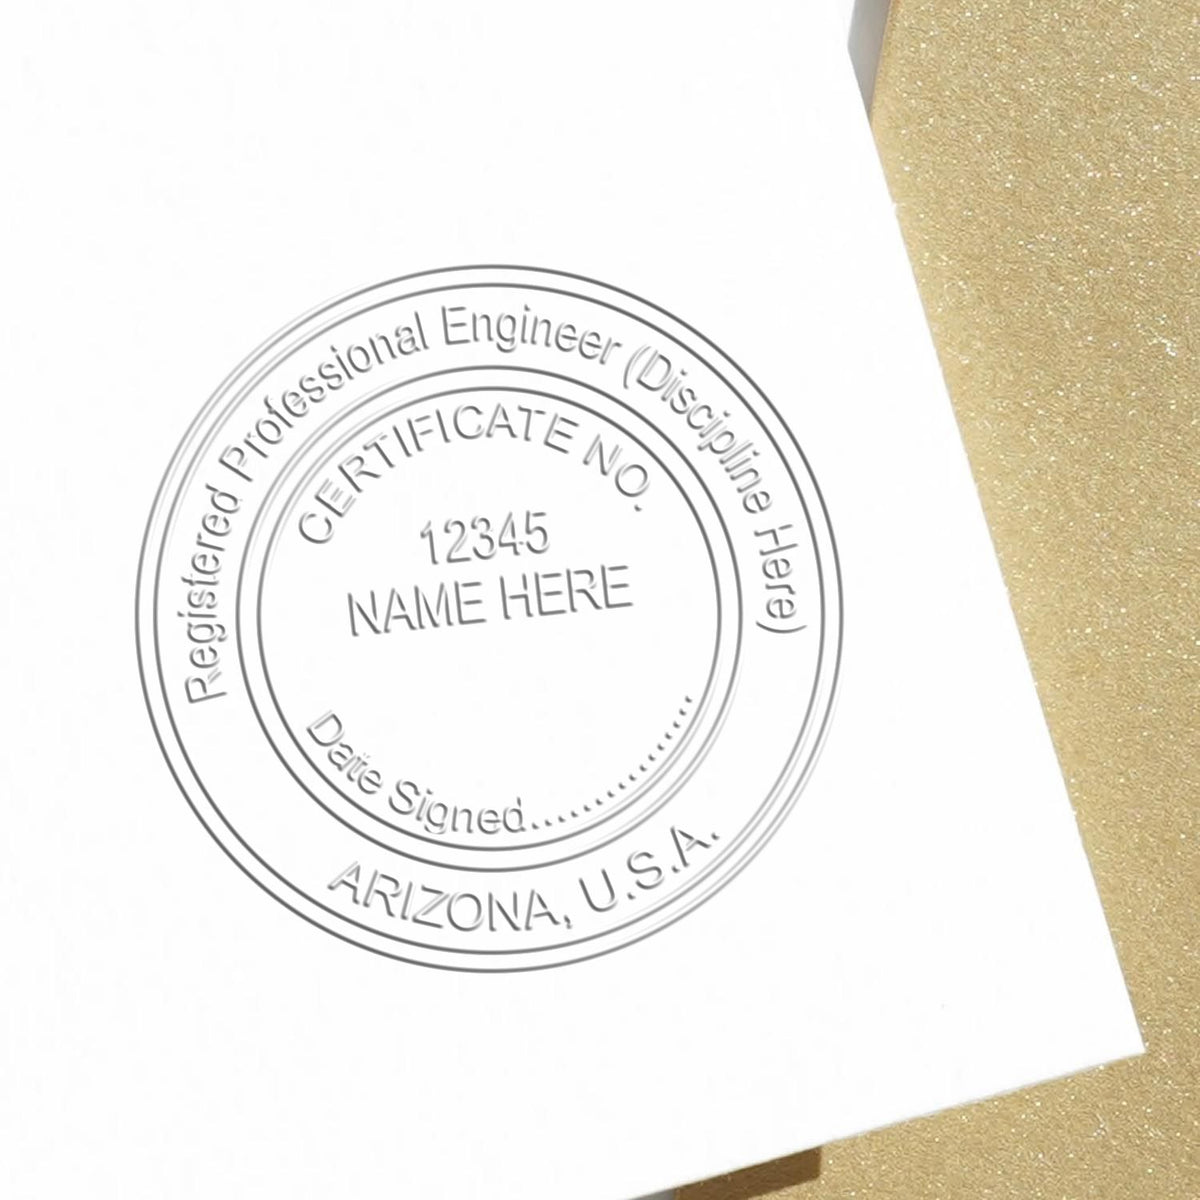 A photograph of the Hybrid Arizona Engineer Seal stamp impression reveals a vivid, professional image of the on paper.